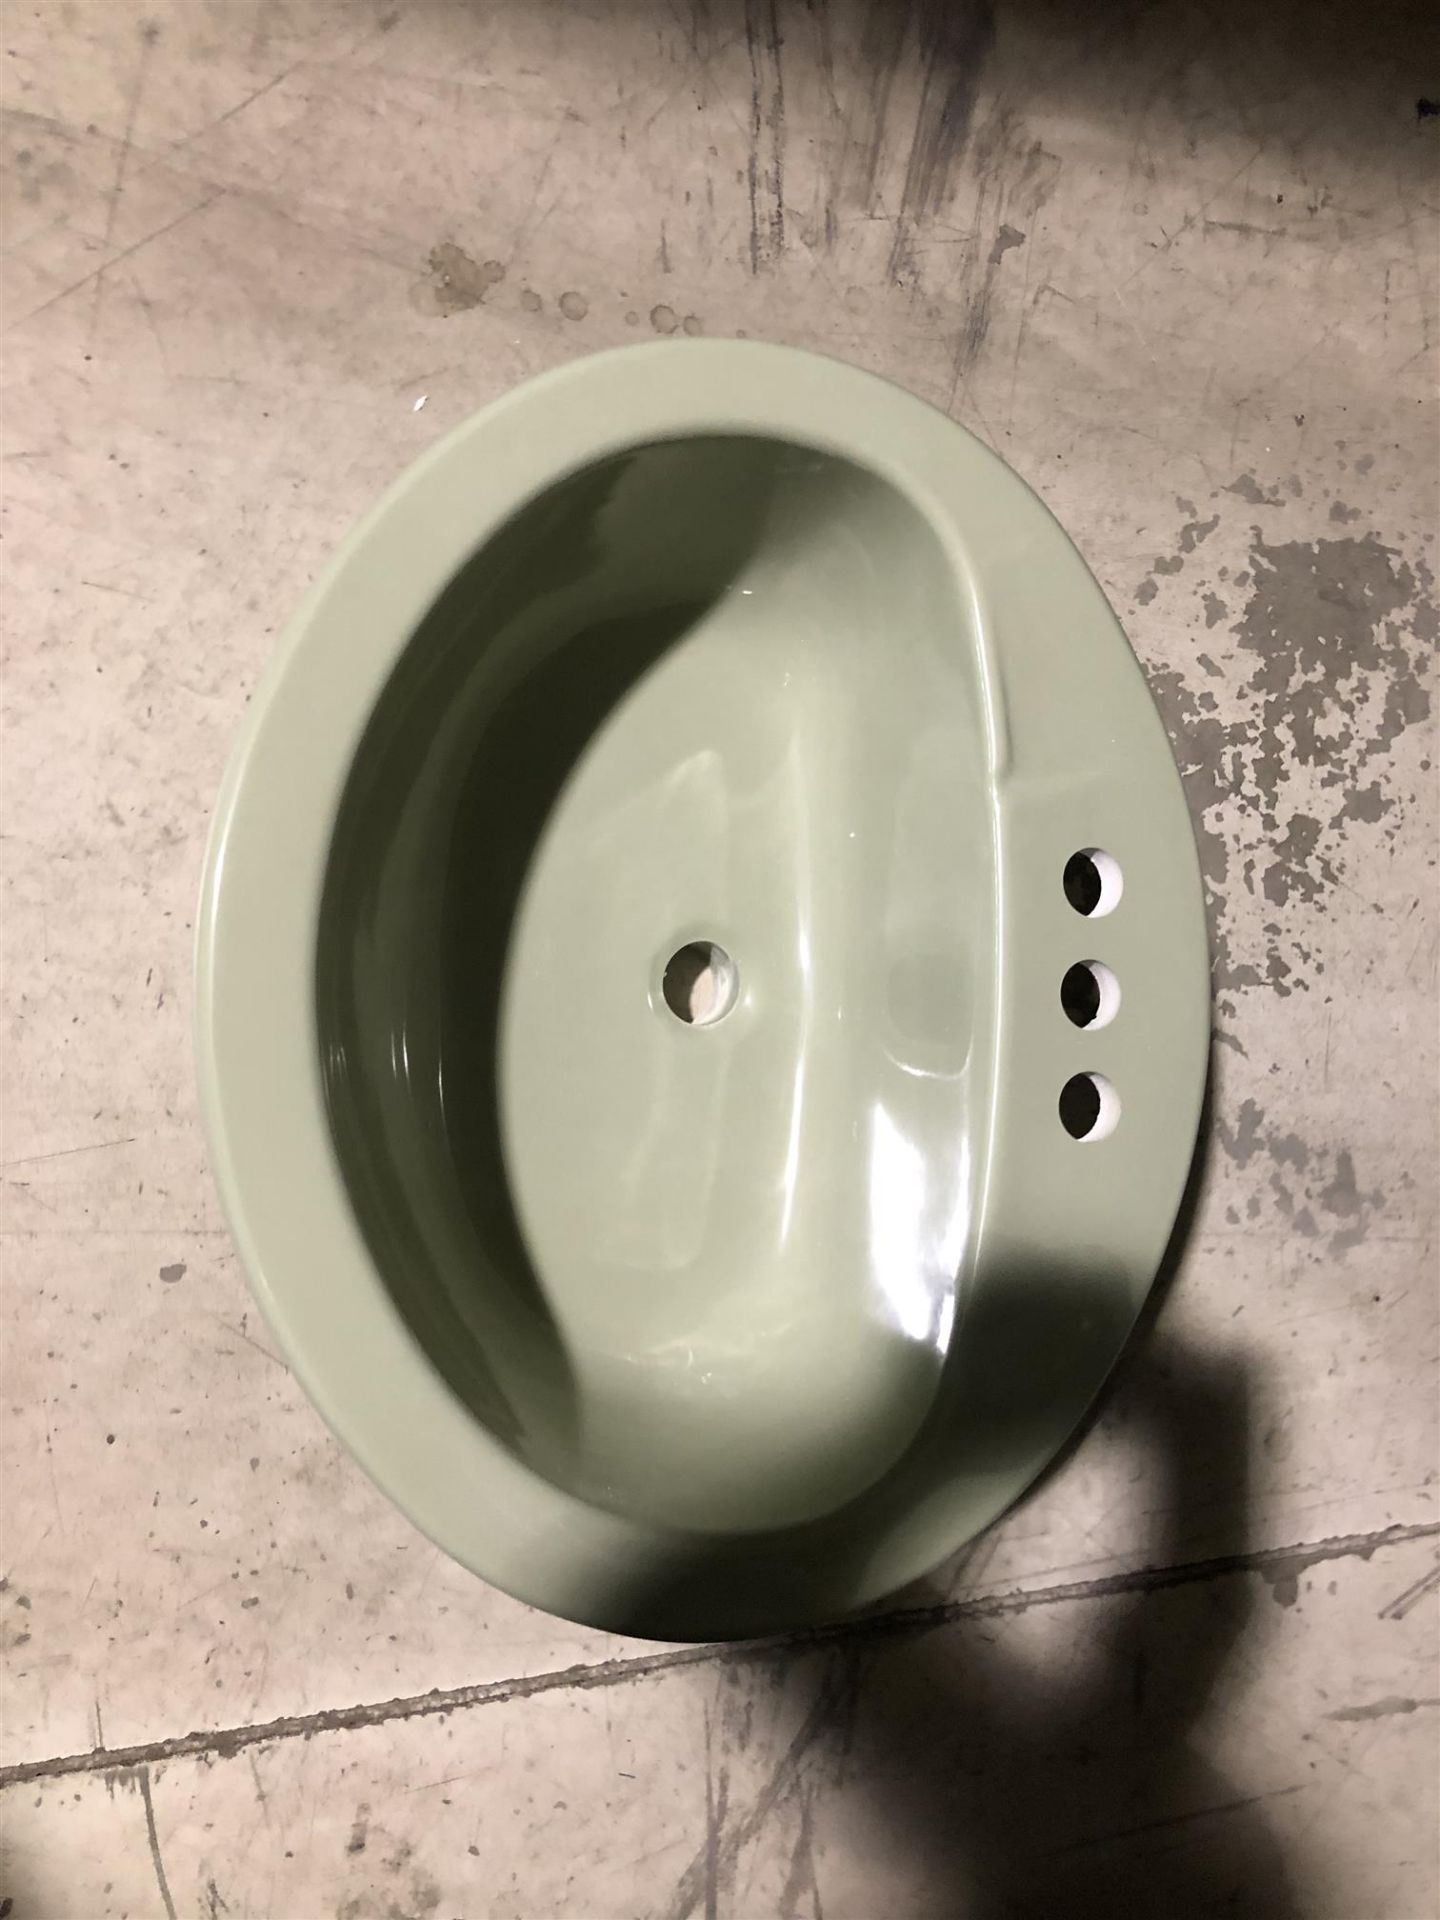 NO MANUFACTUERER LISTED - COLORED SINK SEE PHOTOS - 2PCS - Image 2 of 2